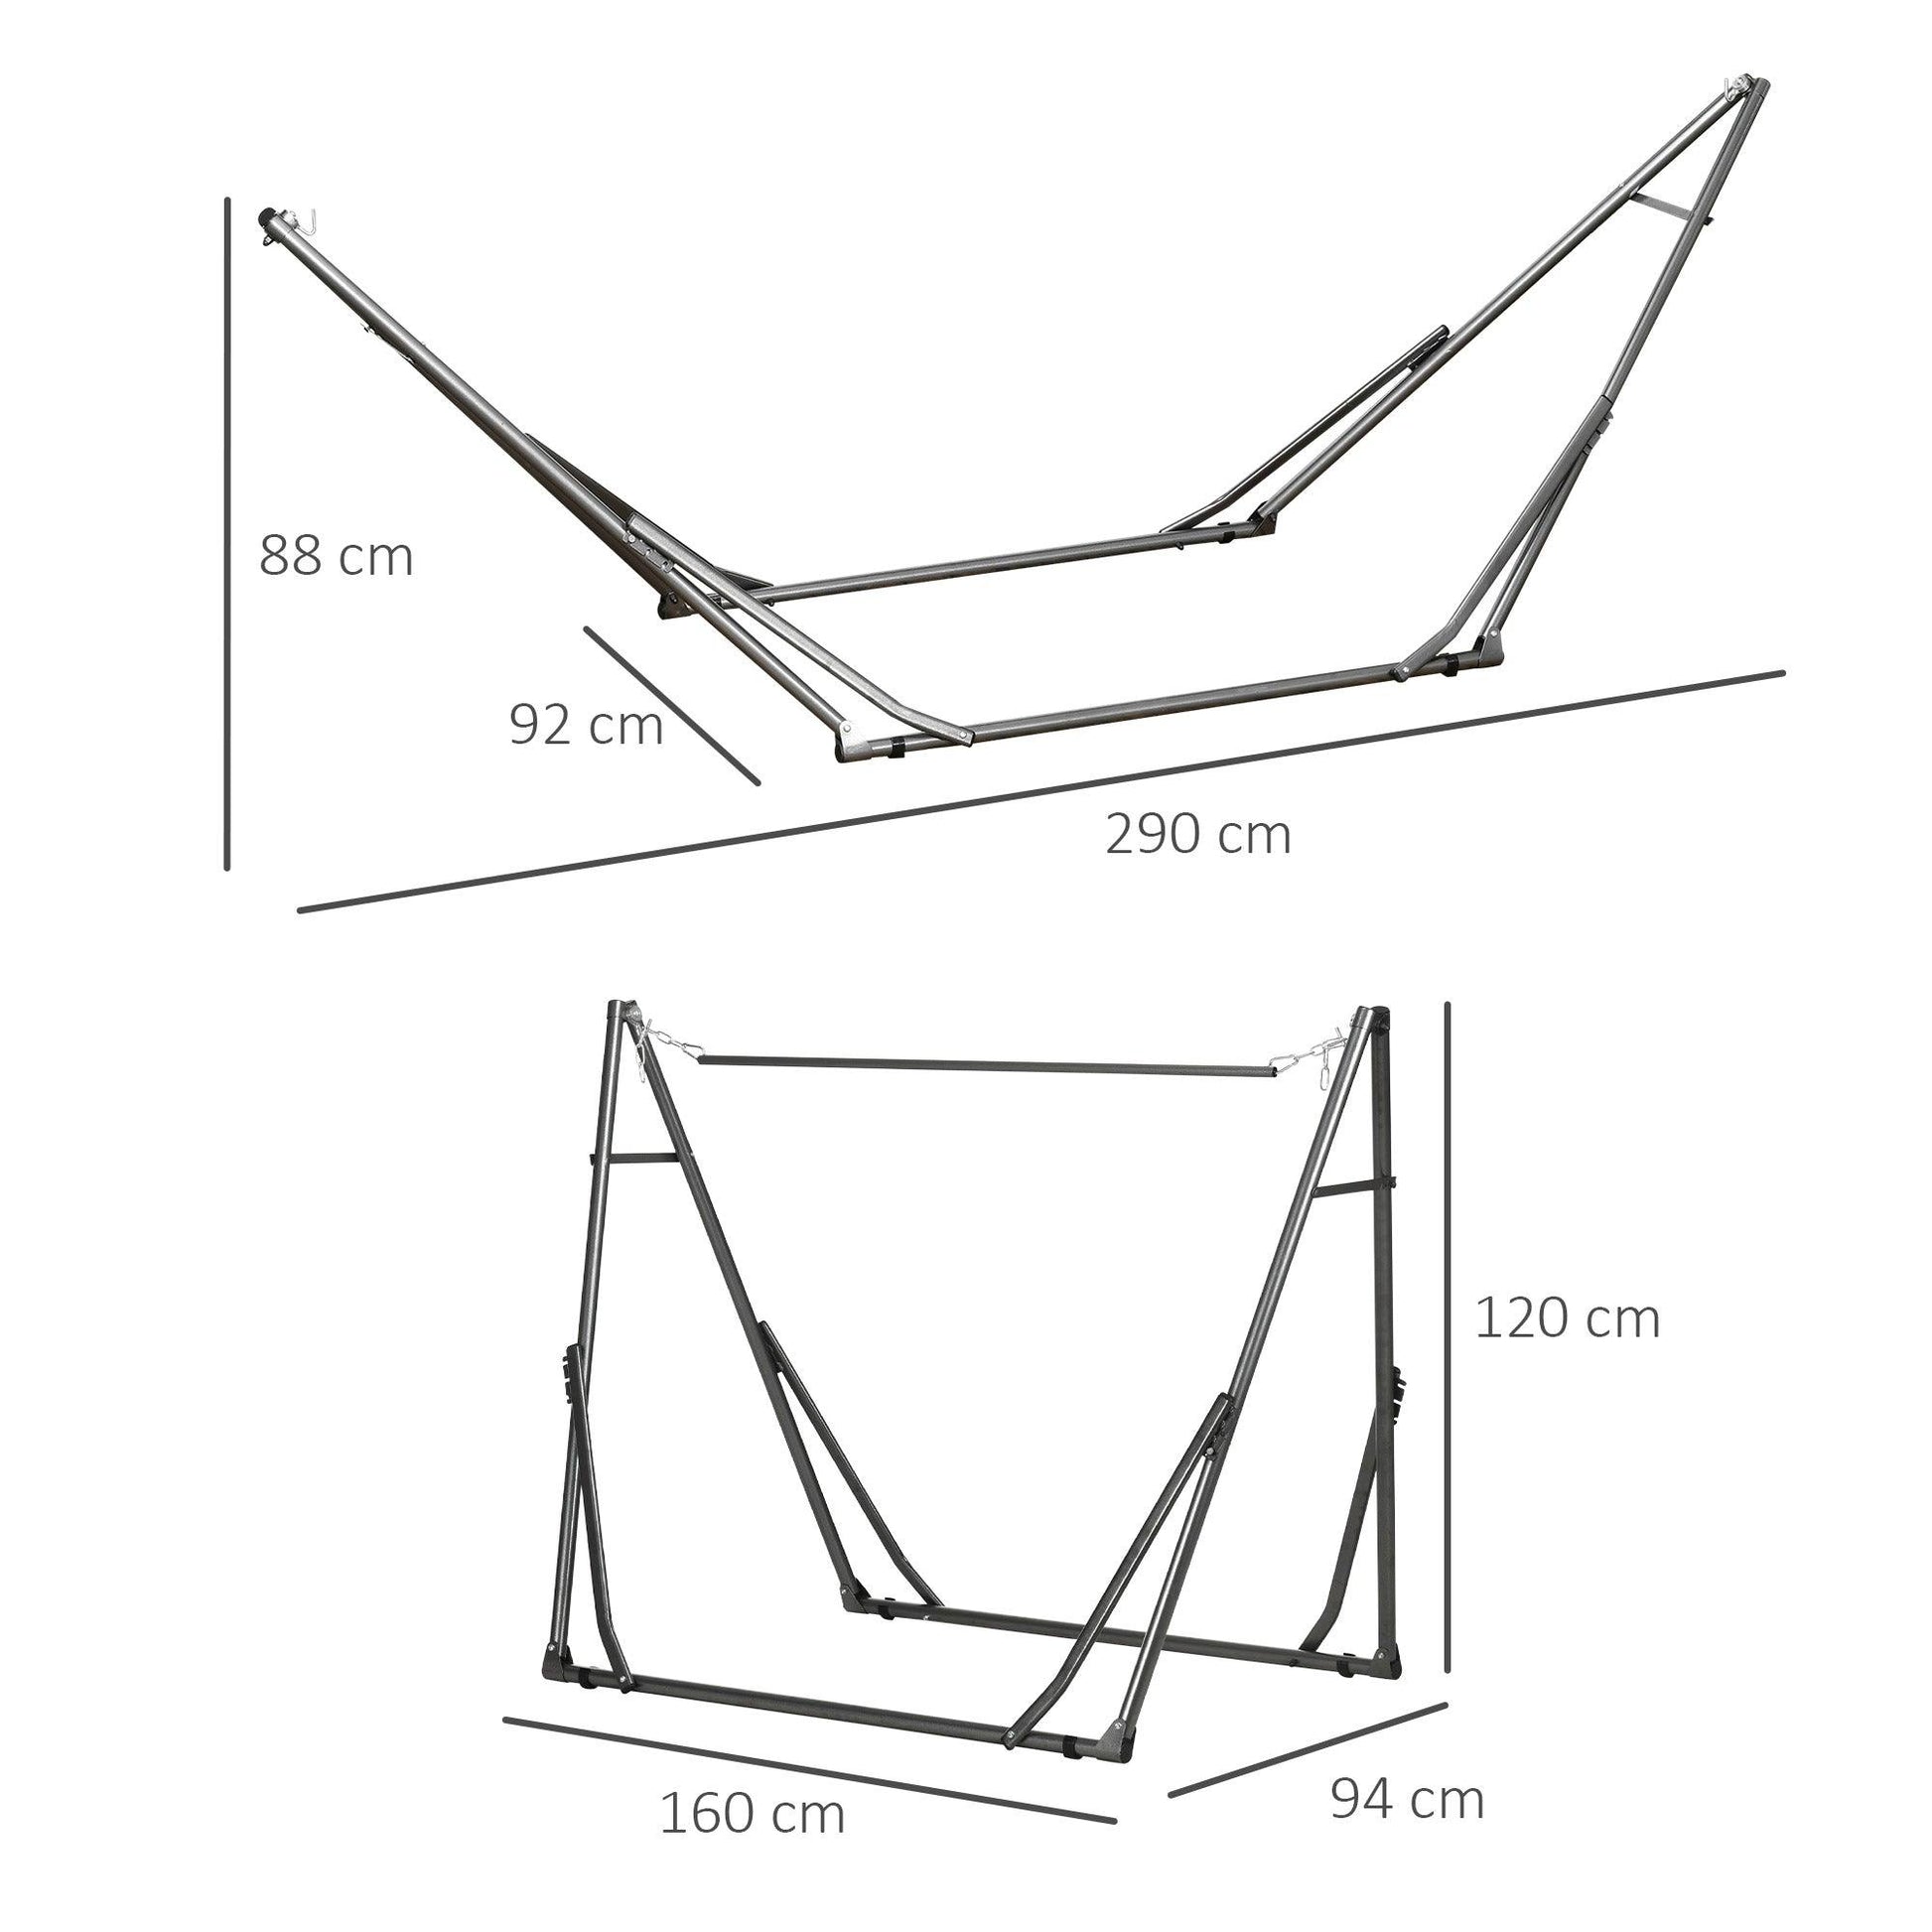 Outsunny Foldable Hammock Stand, 2 in 1 Hammock Net Stand & Clothes Drying Rack - ALL4U RETAILER LTD